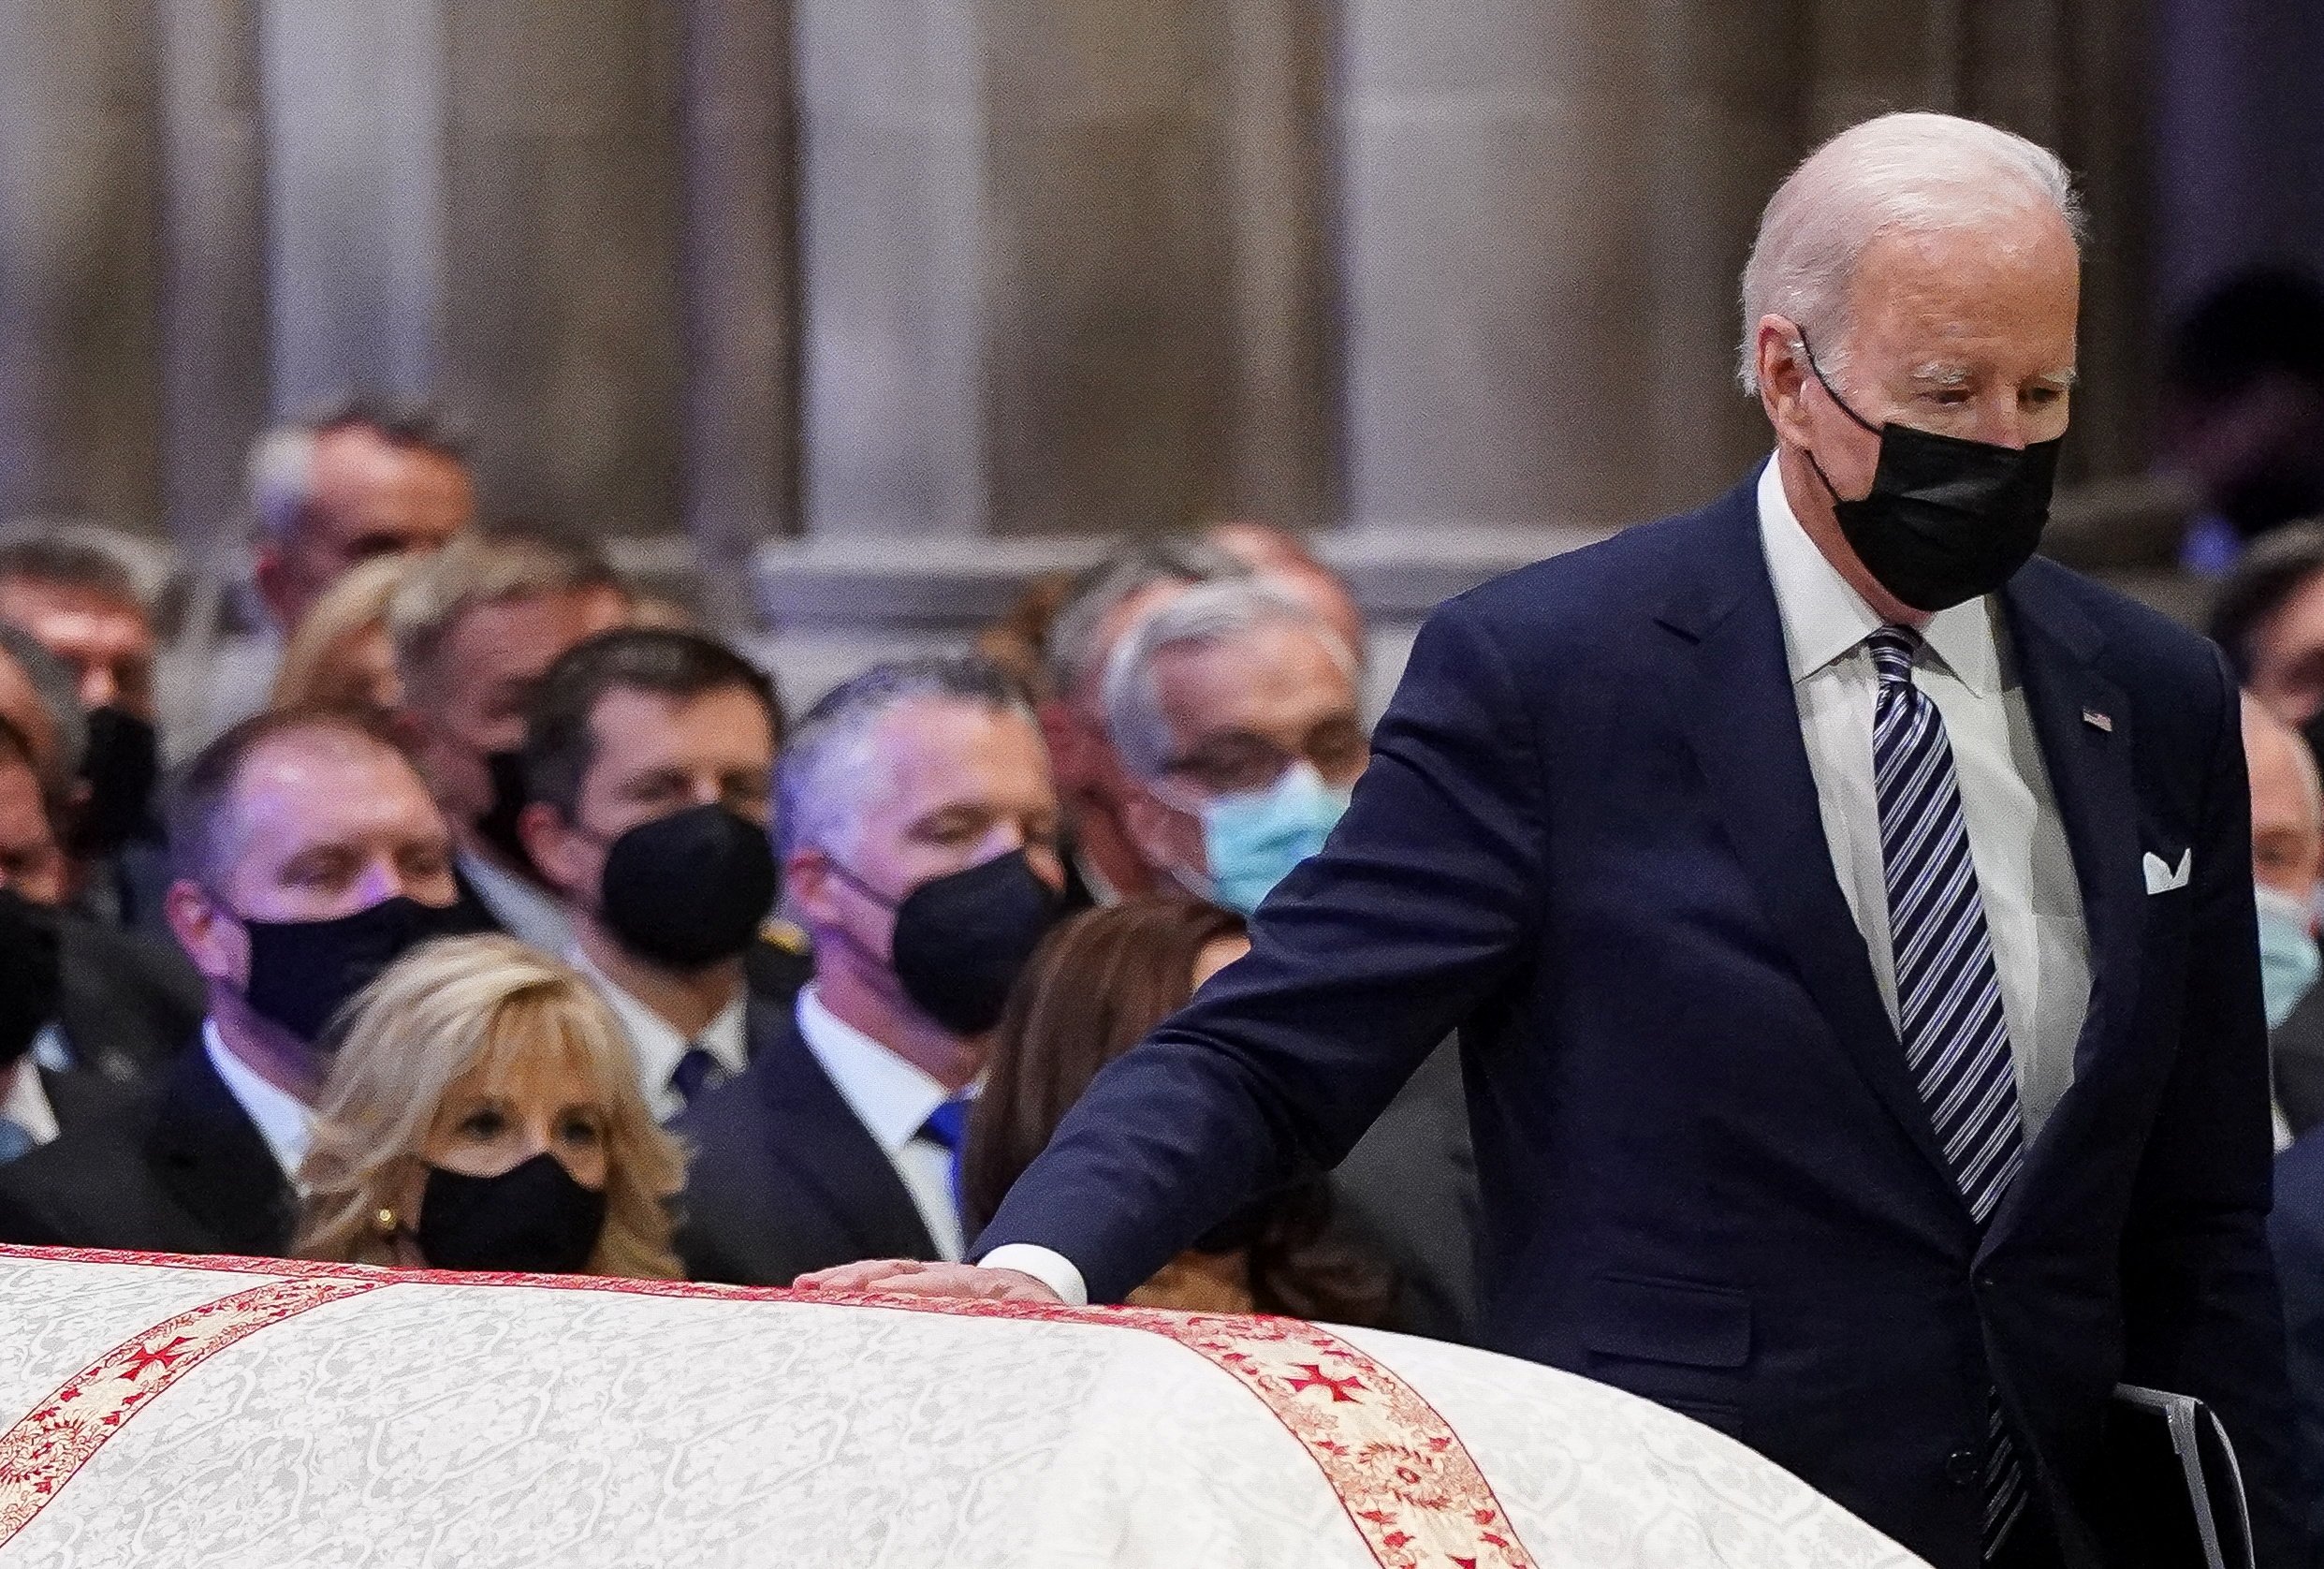 President Joe Biden touches the casket of the late Senate Majority Leader Bob Dole, R-Kan., at the National Cathedral in Washington as he walks up to speak during a Dec. 10, 2021, funeral service. (CNS photo/Kevin Lamarque, Reuters)